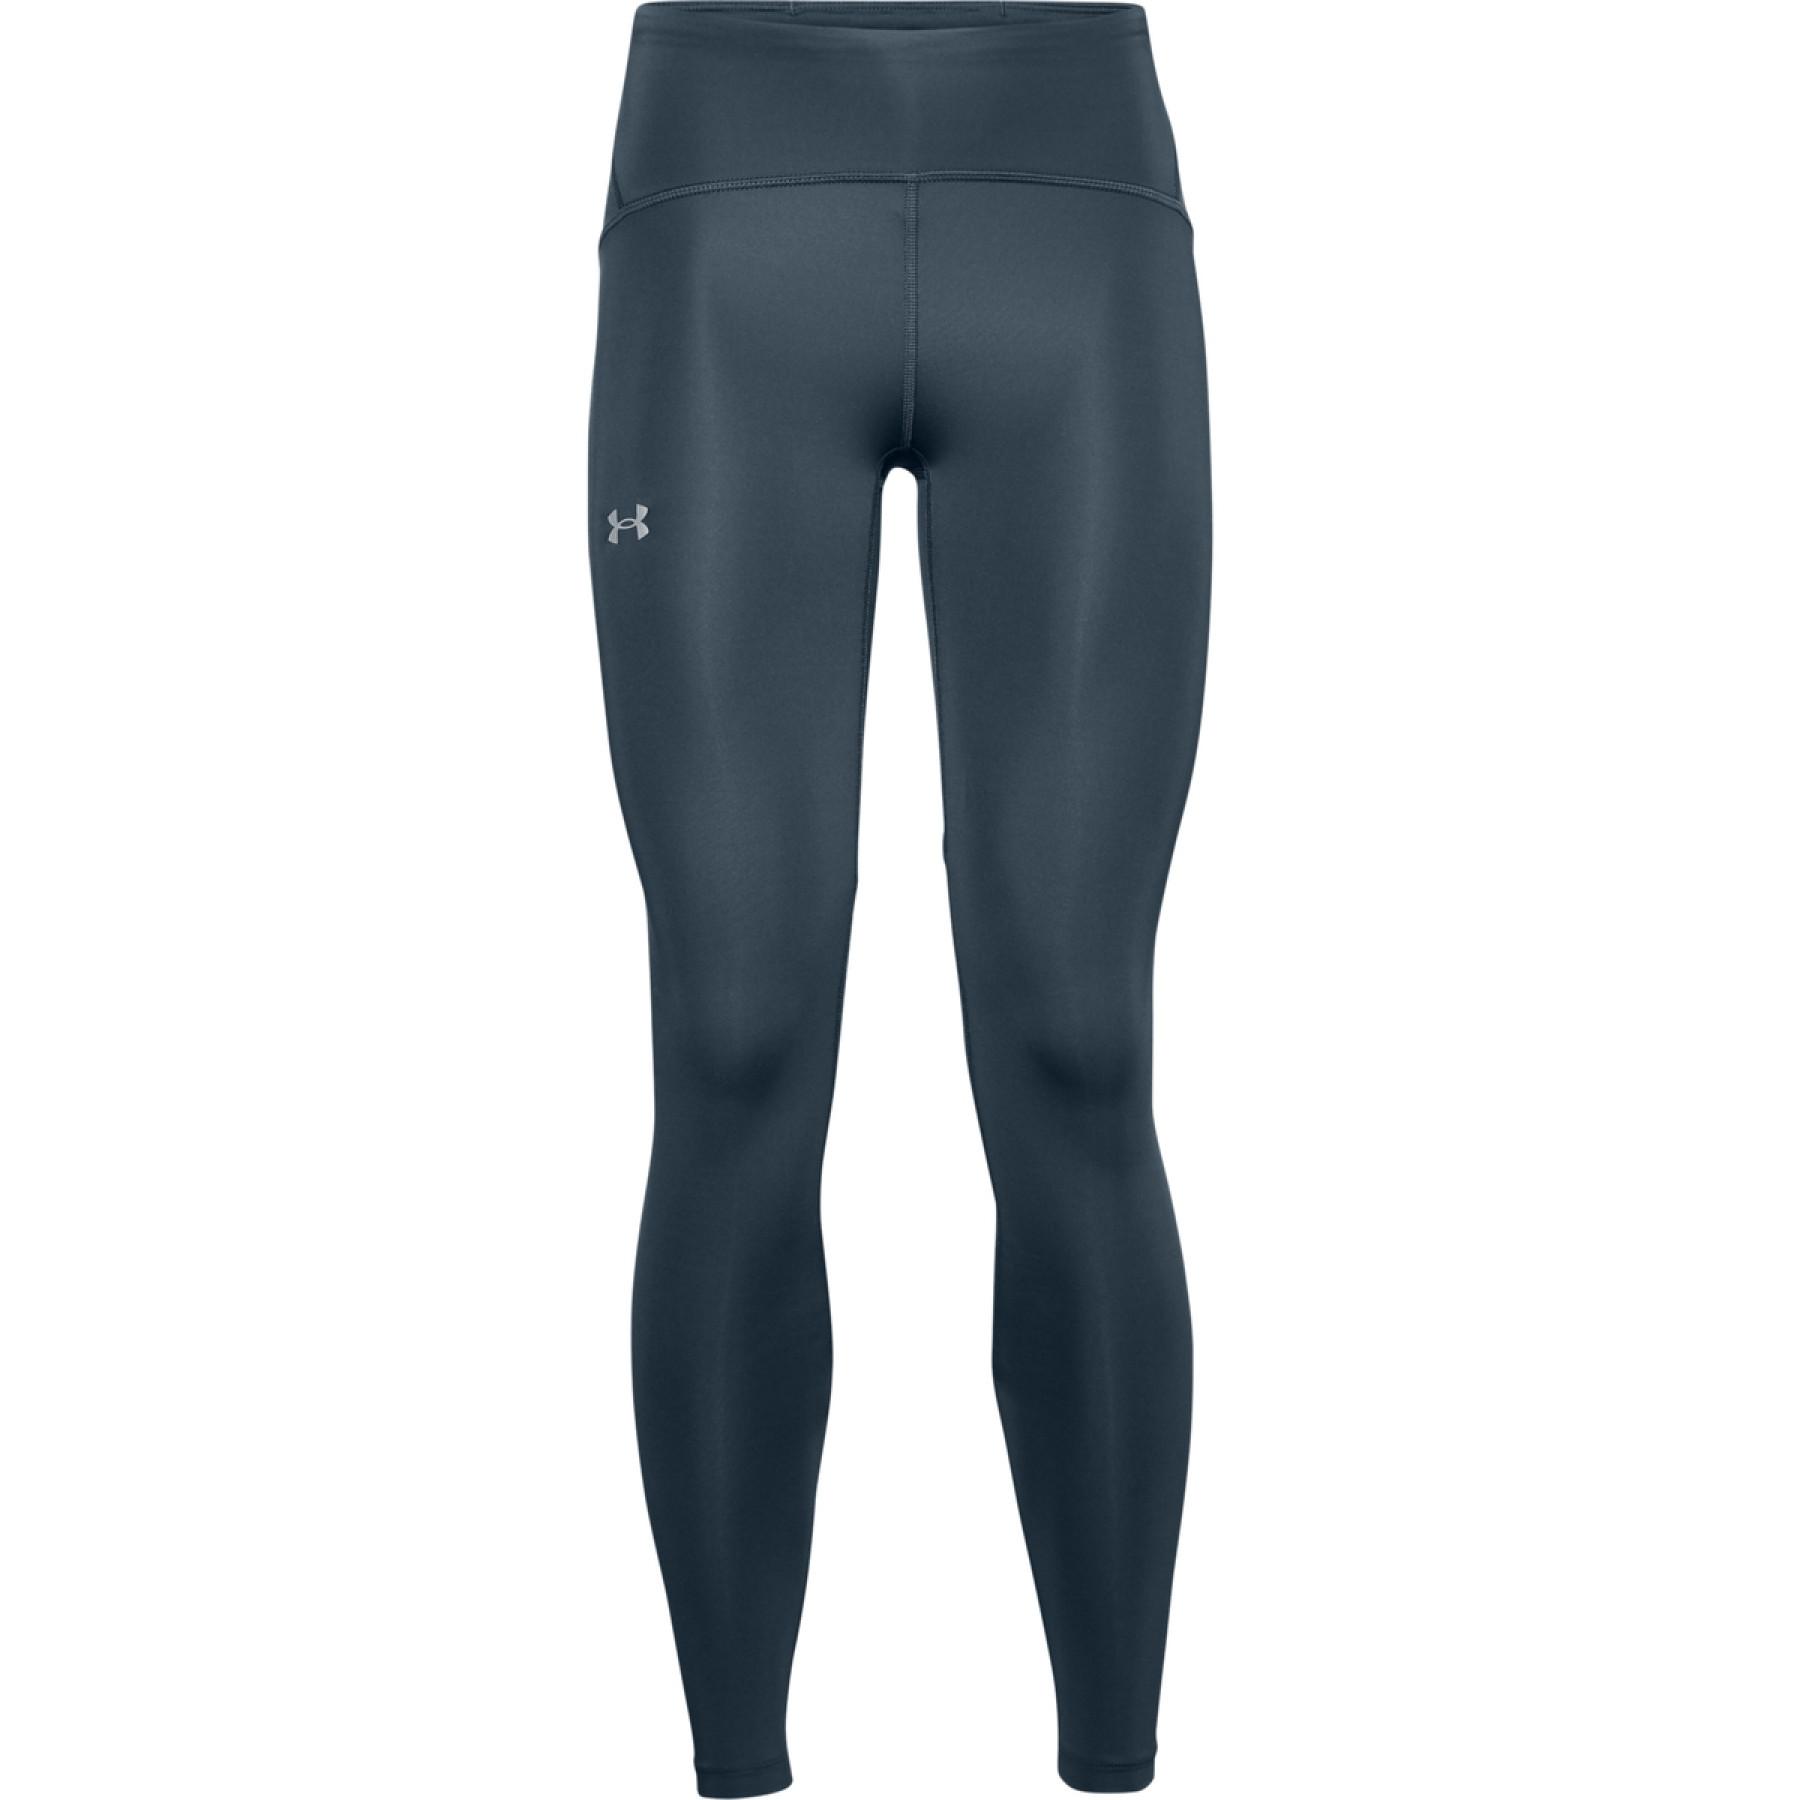 Legging woman Under Armour Fly Fast 2.0 ColdGear